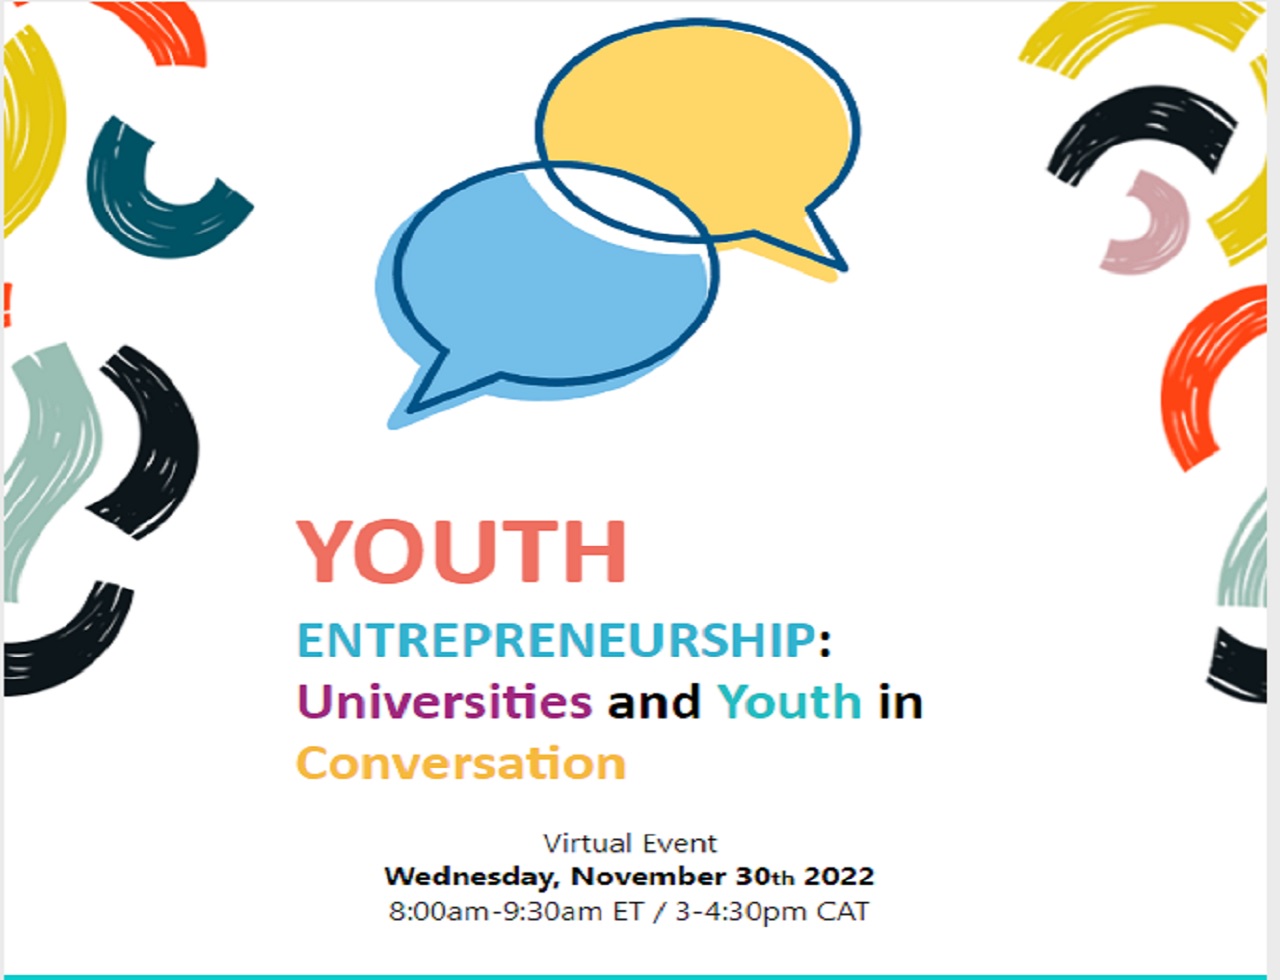 Youth Entrepreneurship: Universities and Youth conversation 